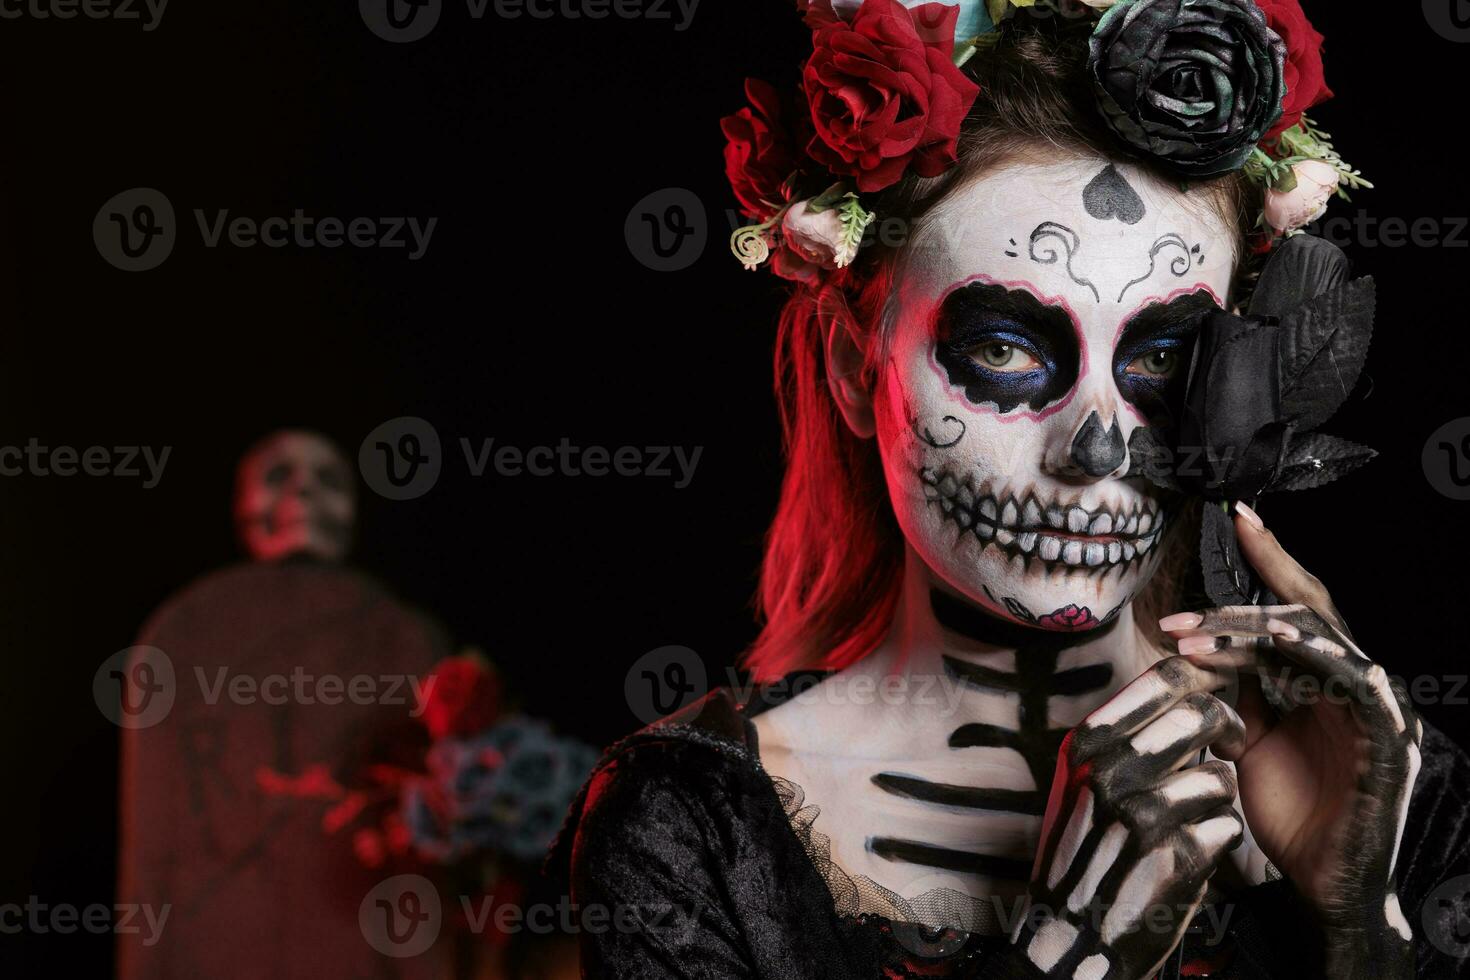 Spooky santa muerte lady posing with black roses, acting like holy goddess of death on day of the dead mexican holiday. Celebrating halloween ritual with la cavalera catrina skull body art. photo